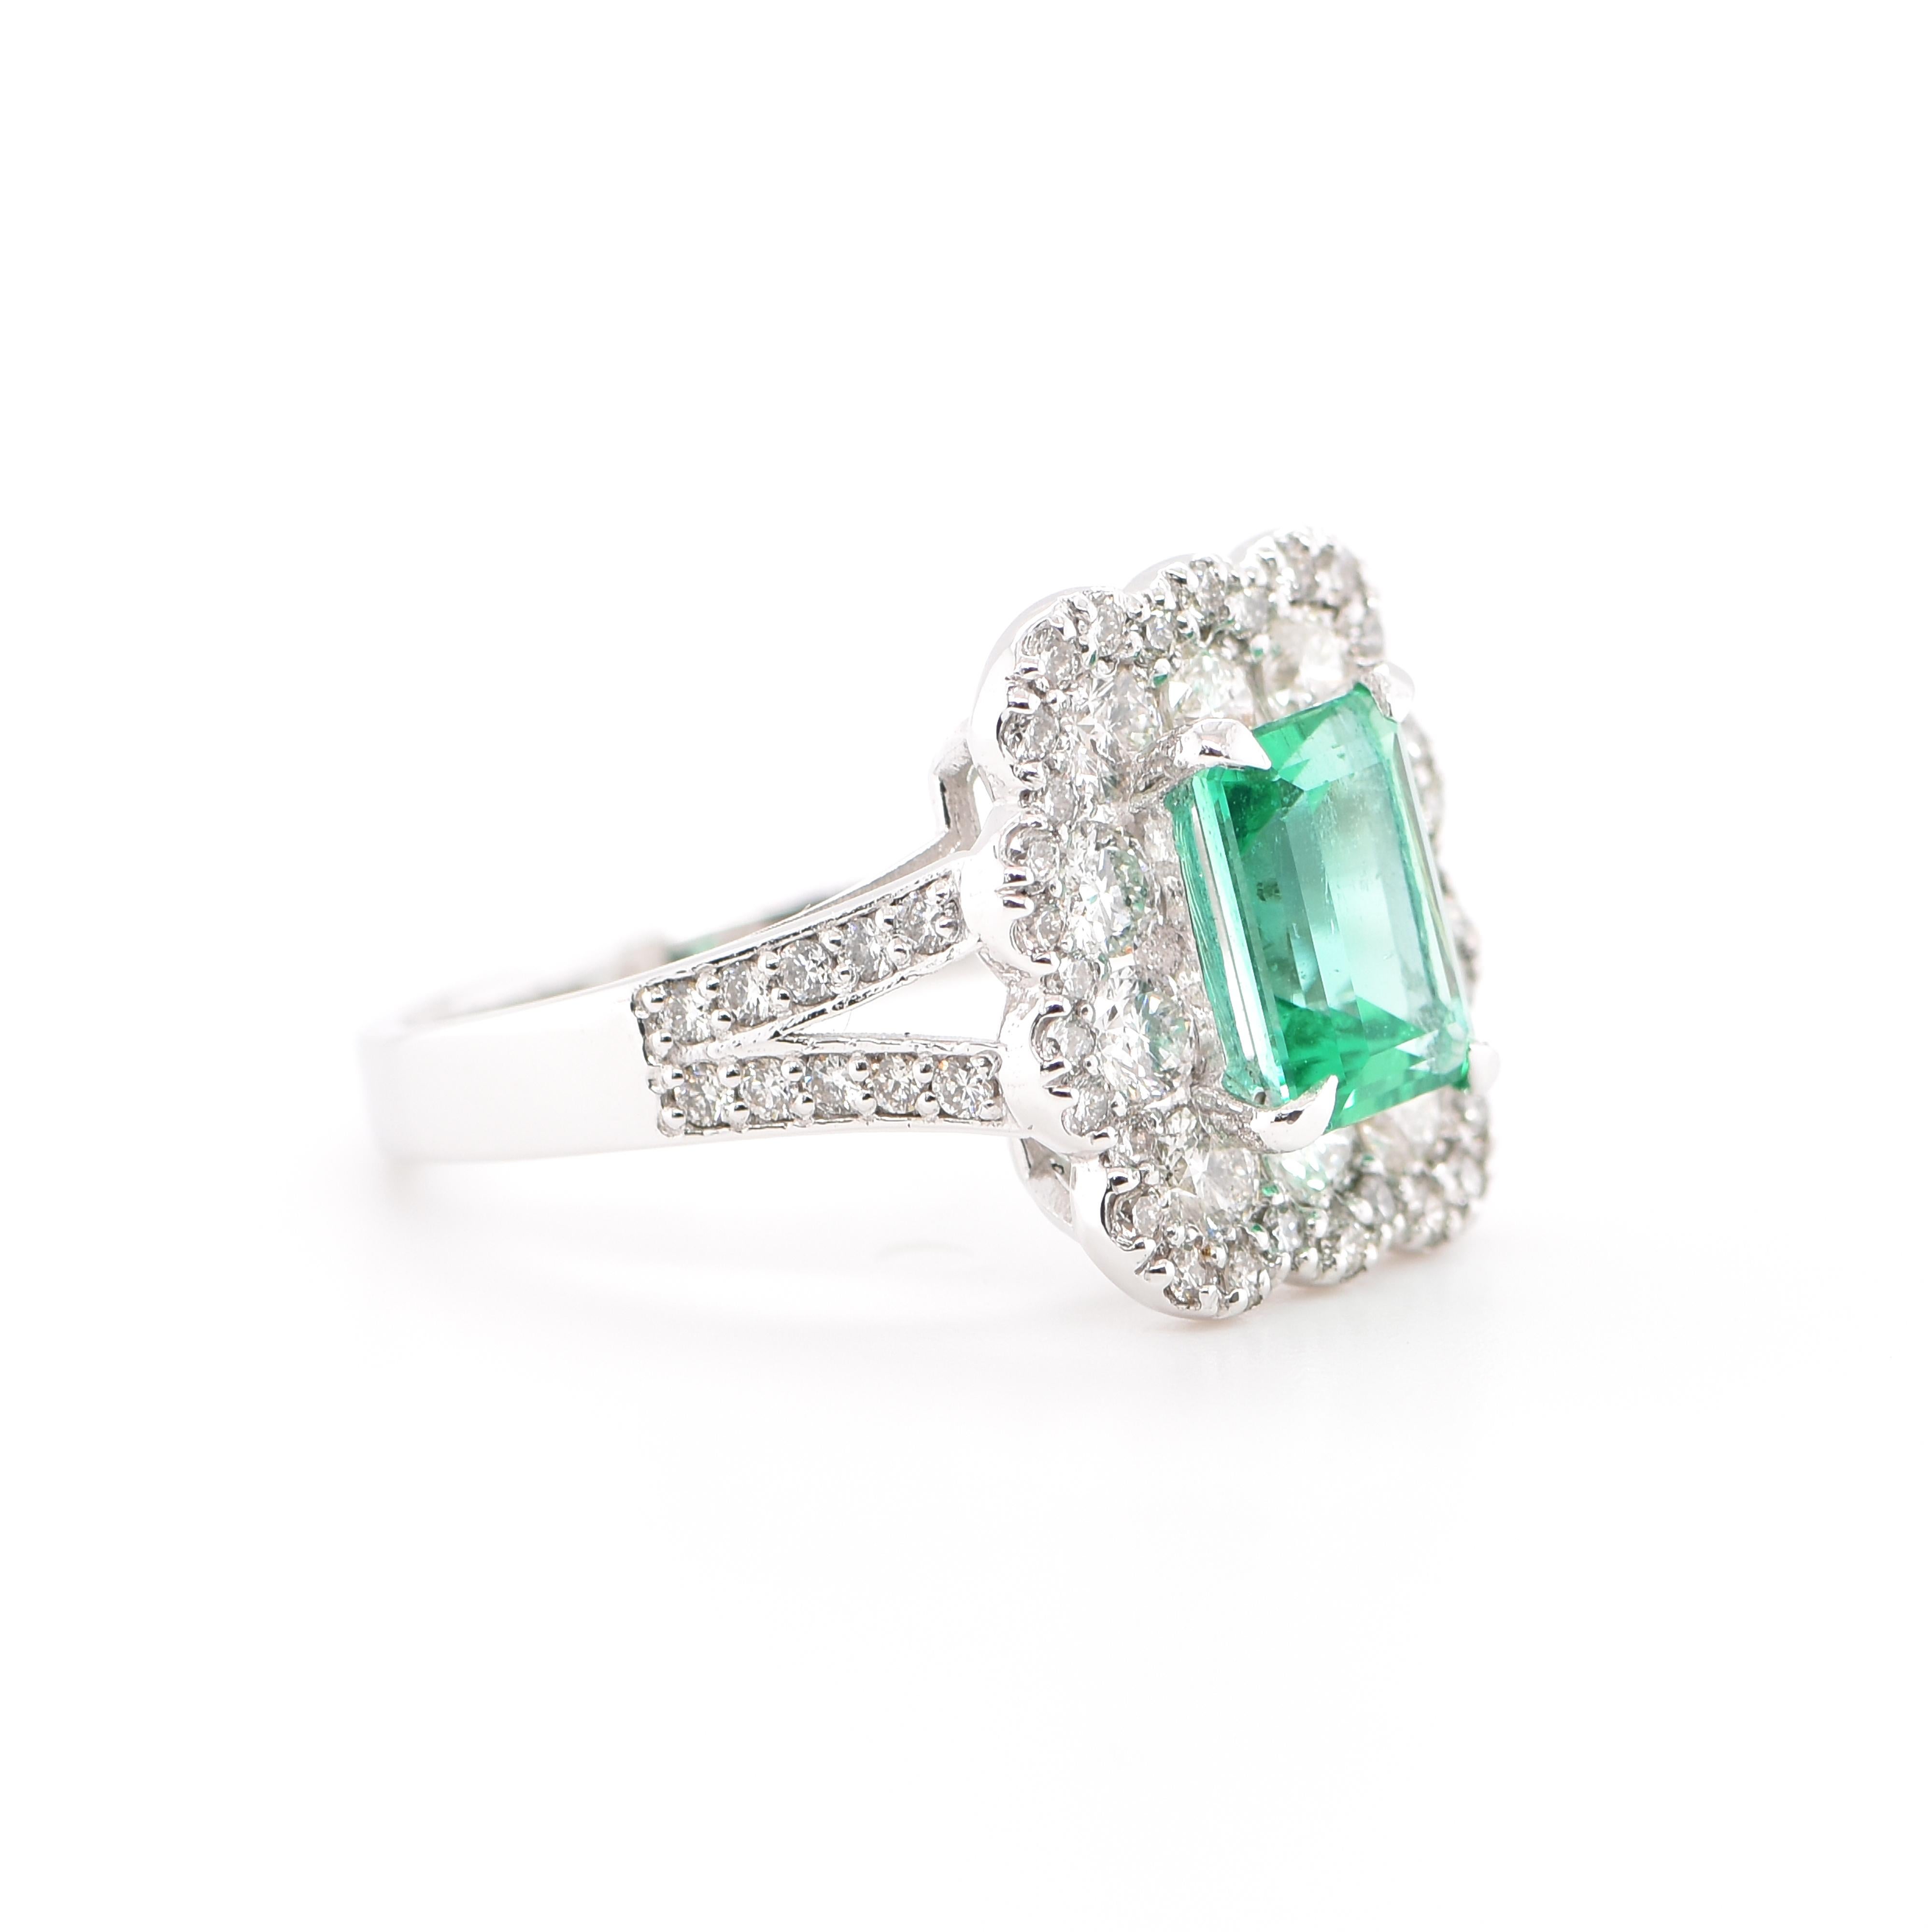 Modern GIA Certified 1.23 Carat Natural Colombian Emerald Ring Set in Platinum